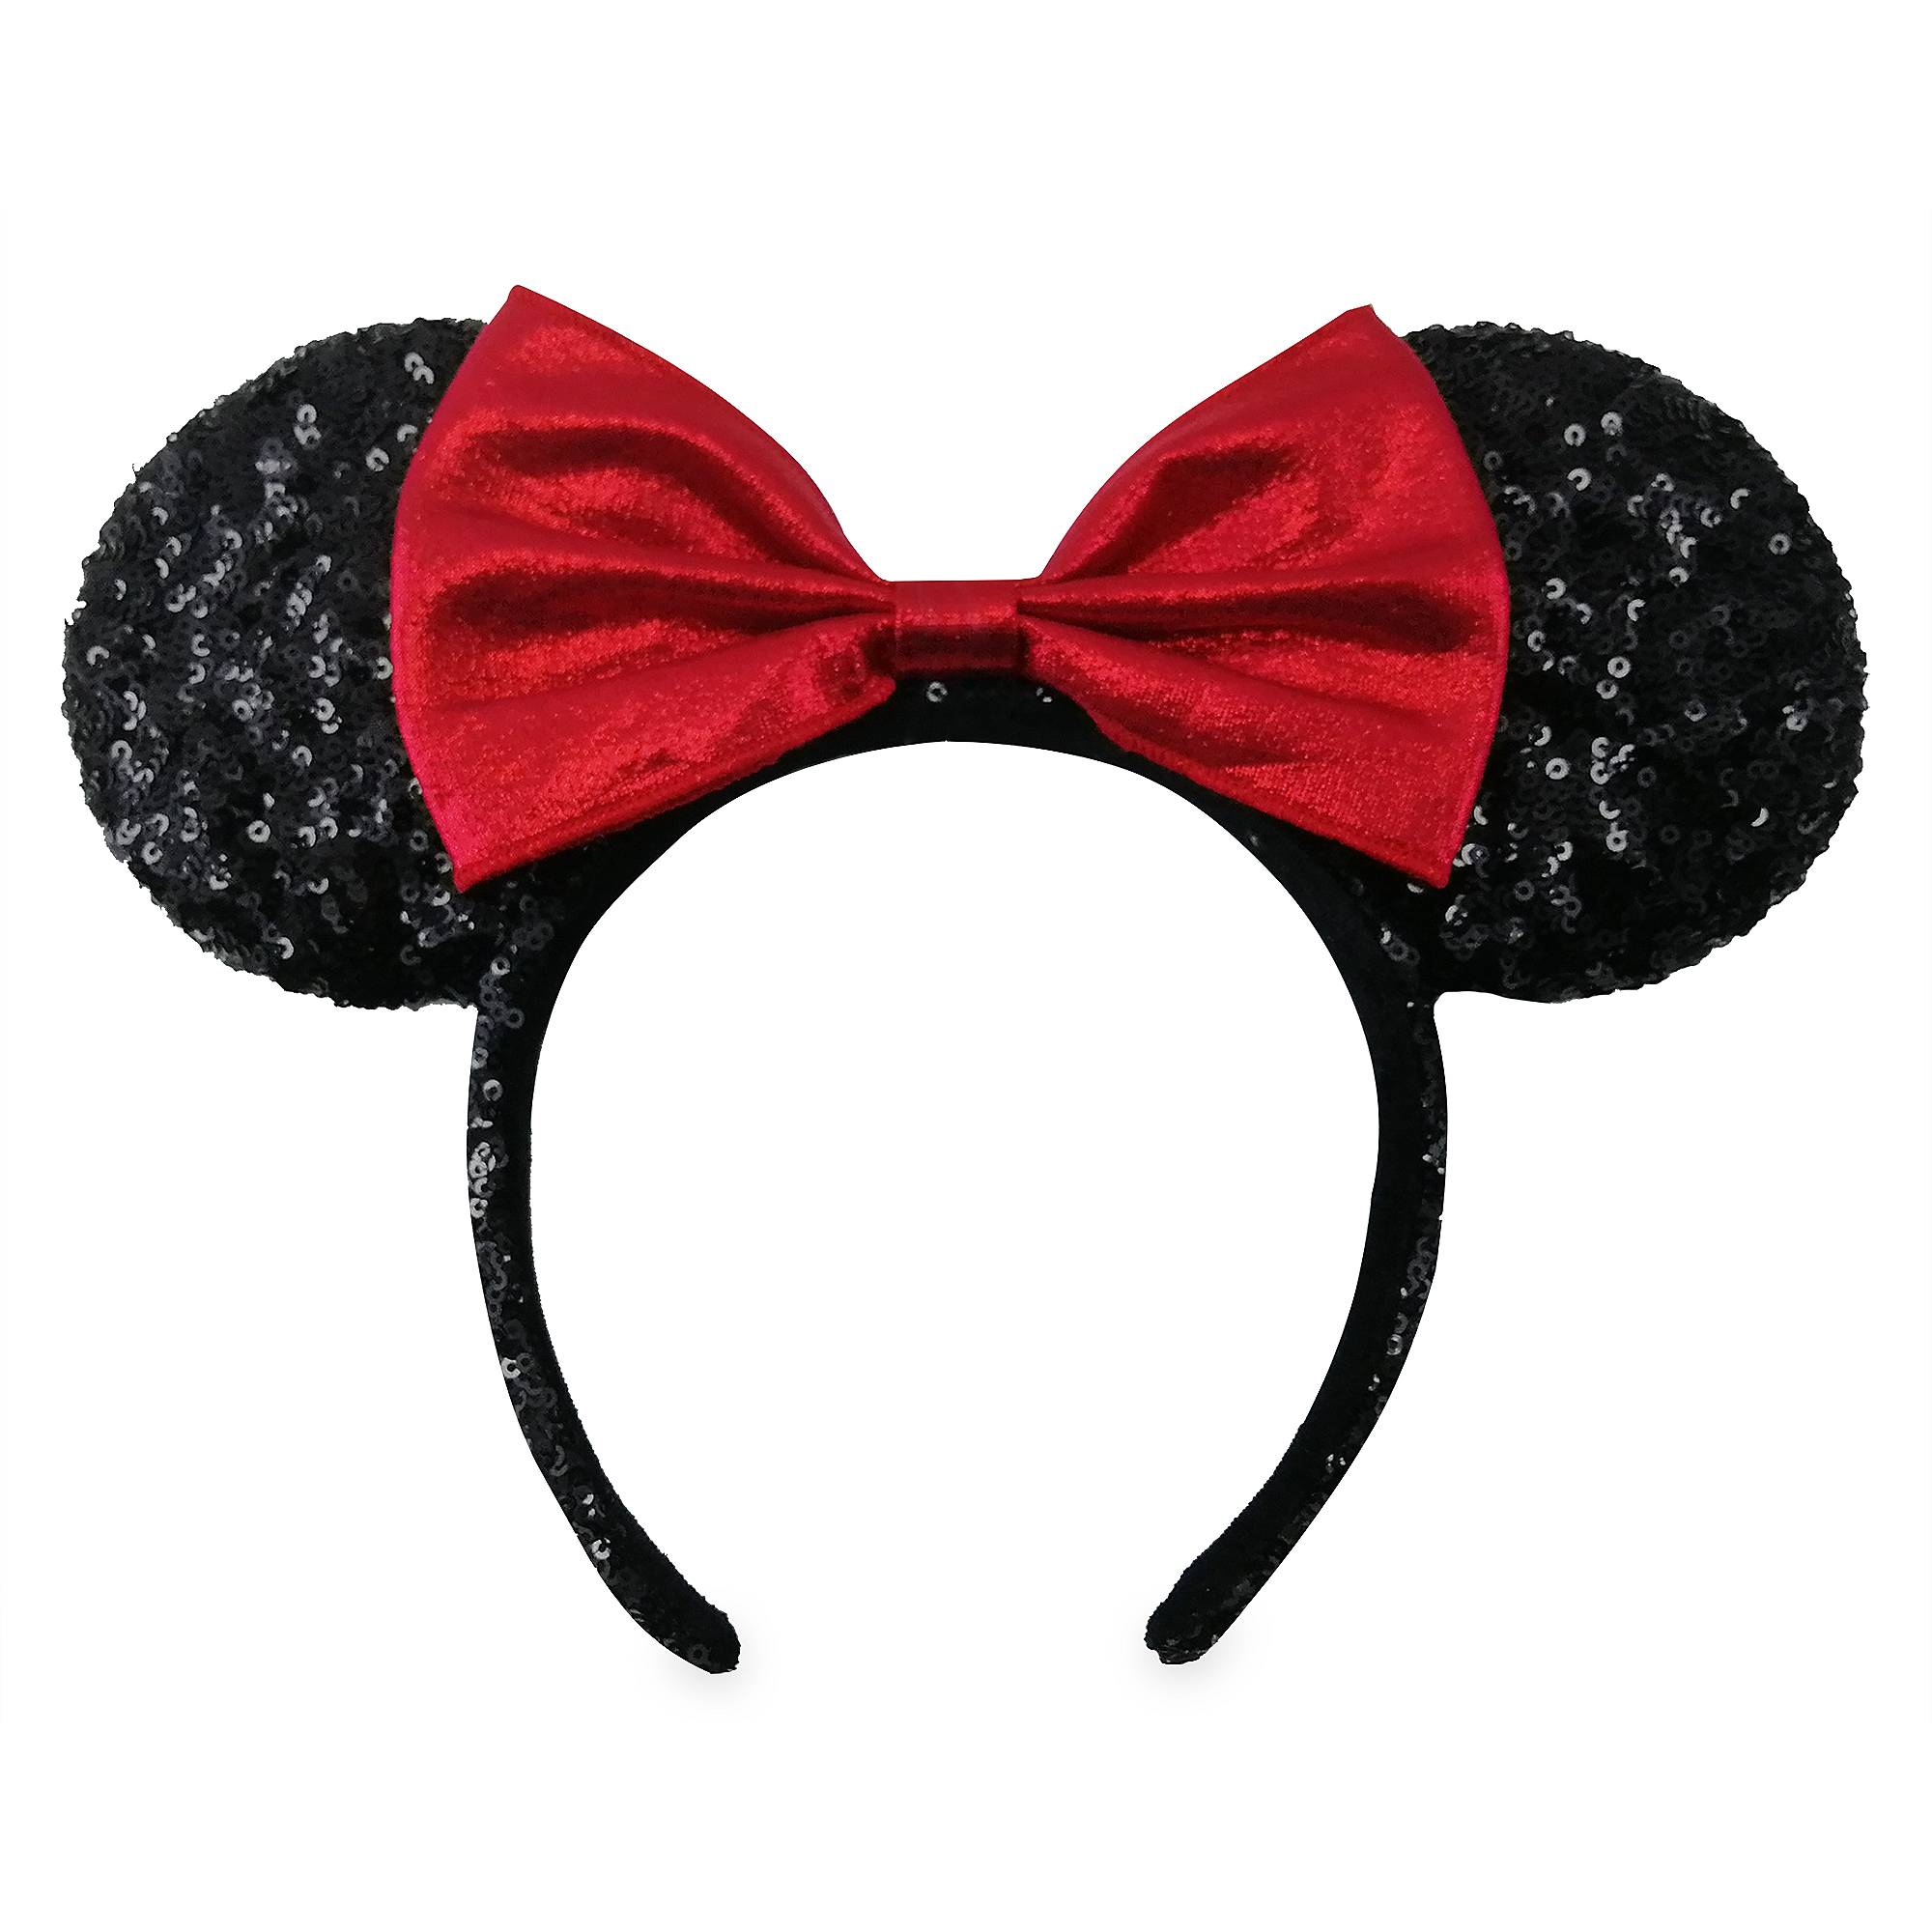 Minnie Mouse Sequined Ear Headband with Velvet Bow – Black and Red image